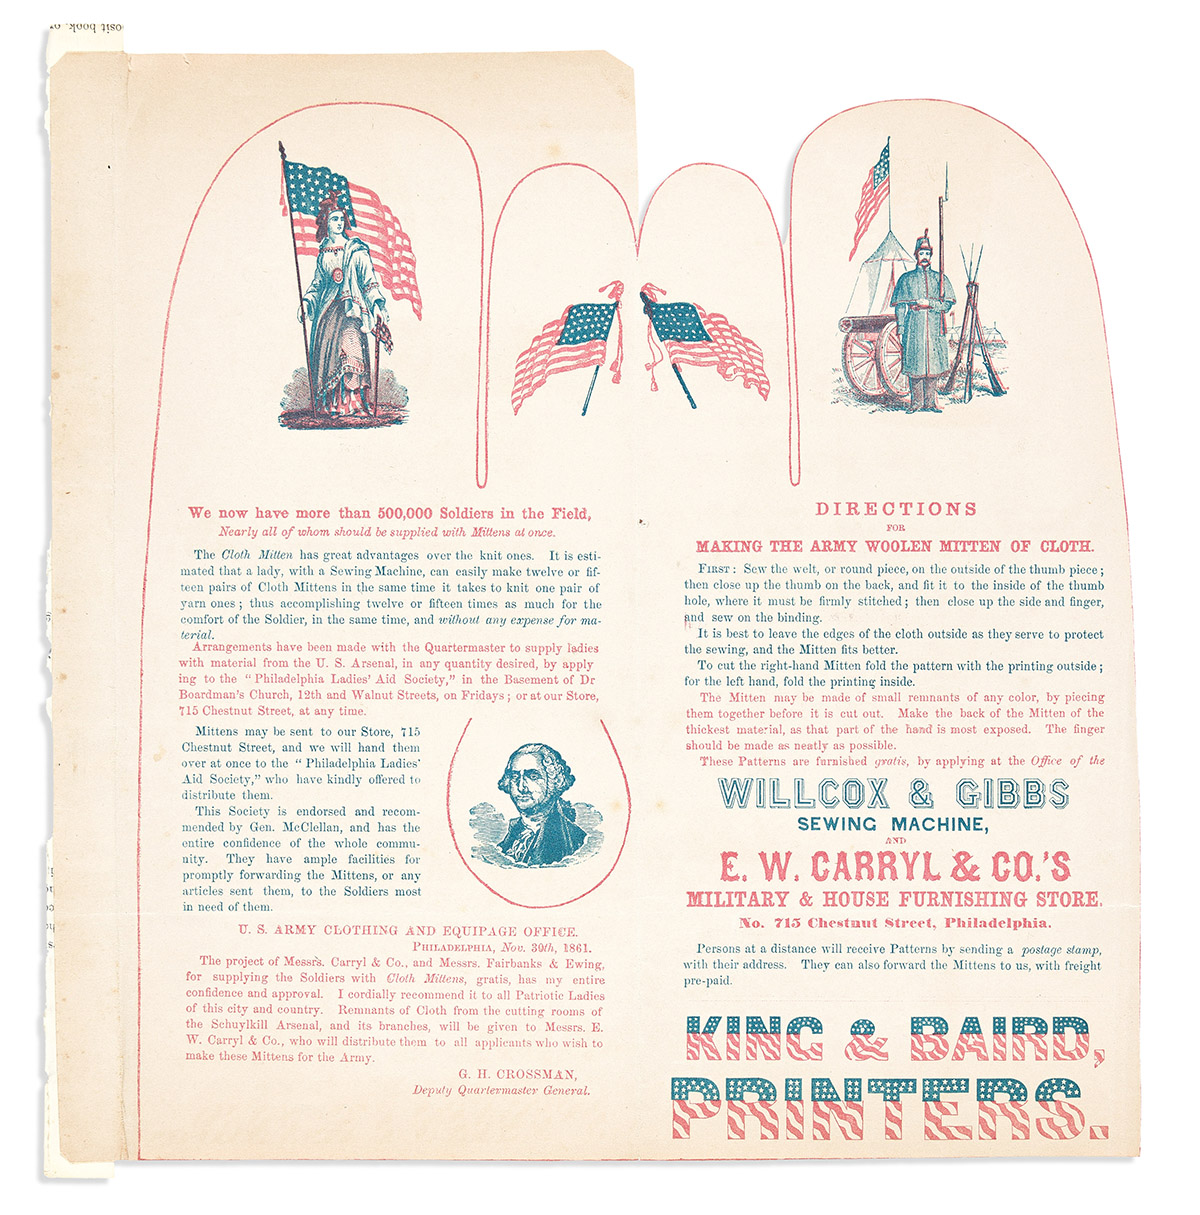 (CIVIL WAR.) Pair of E.W. Carryl & Co. circulars: for Army and Navy Goods, and Camp Utensils and for making army mittens.